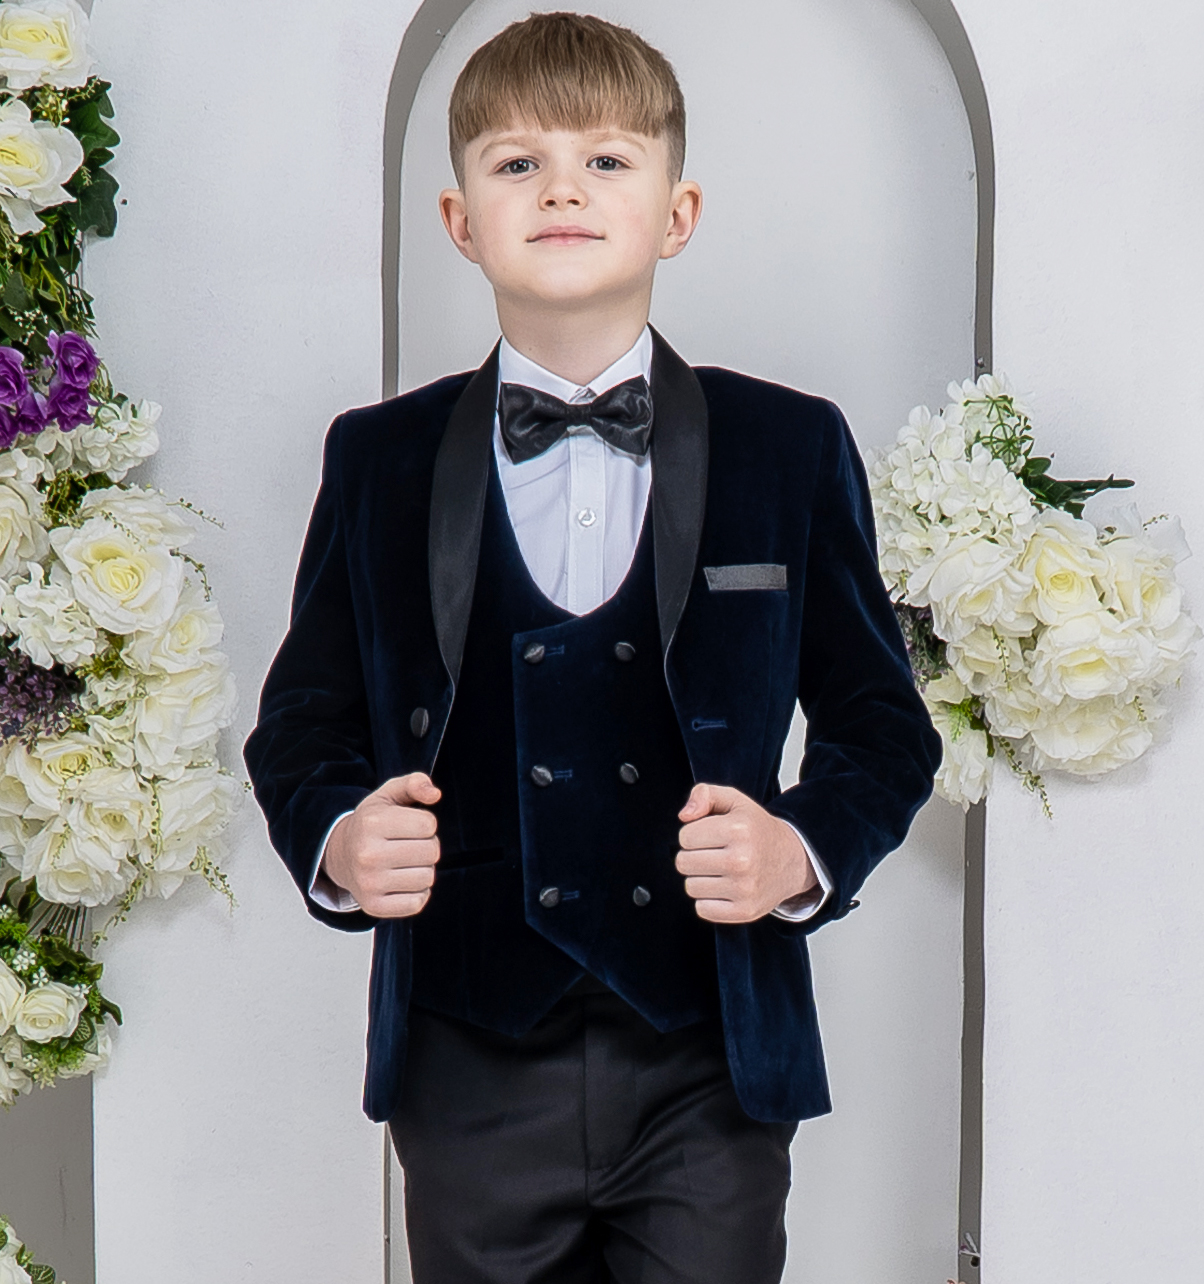 Toddler Suits Boys Tuxedo Suits Wedding Outfit Ring Bearer Suits Easter Suit  5Piece Boys Set for Boys Size Yellow 8 - Walmart.com